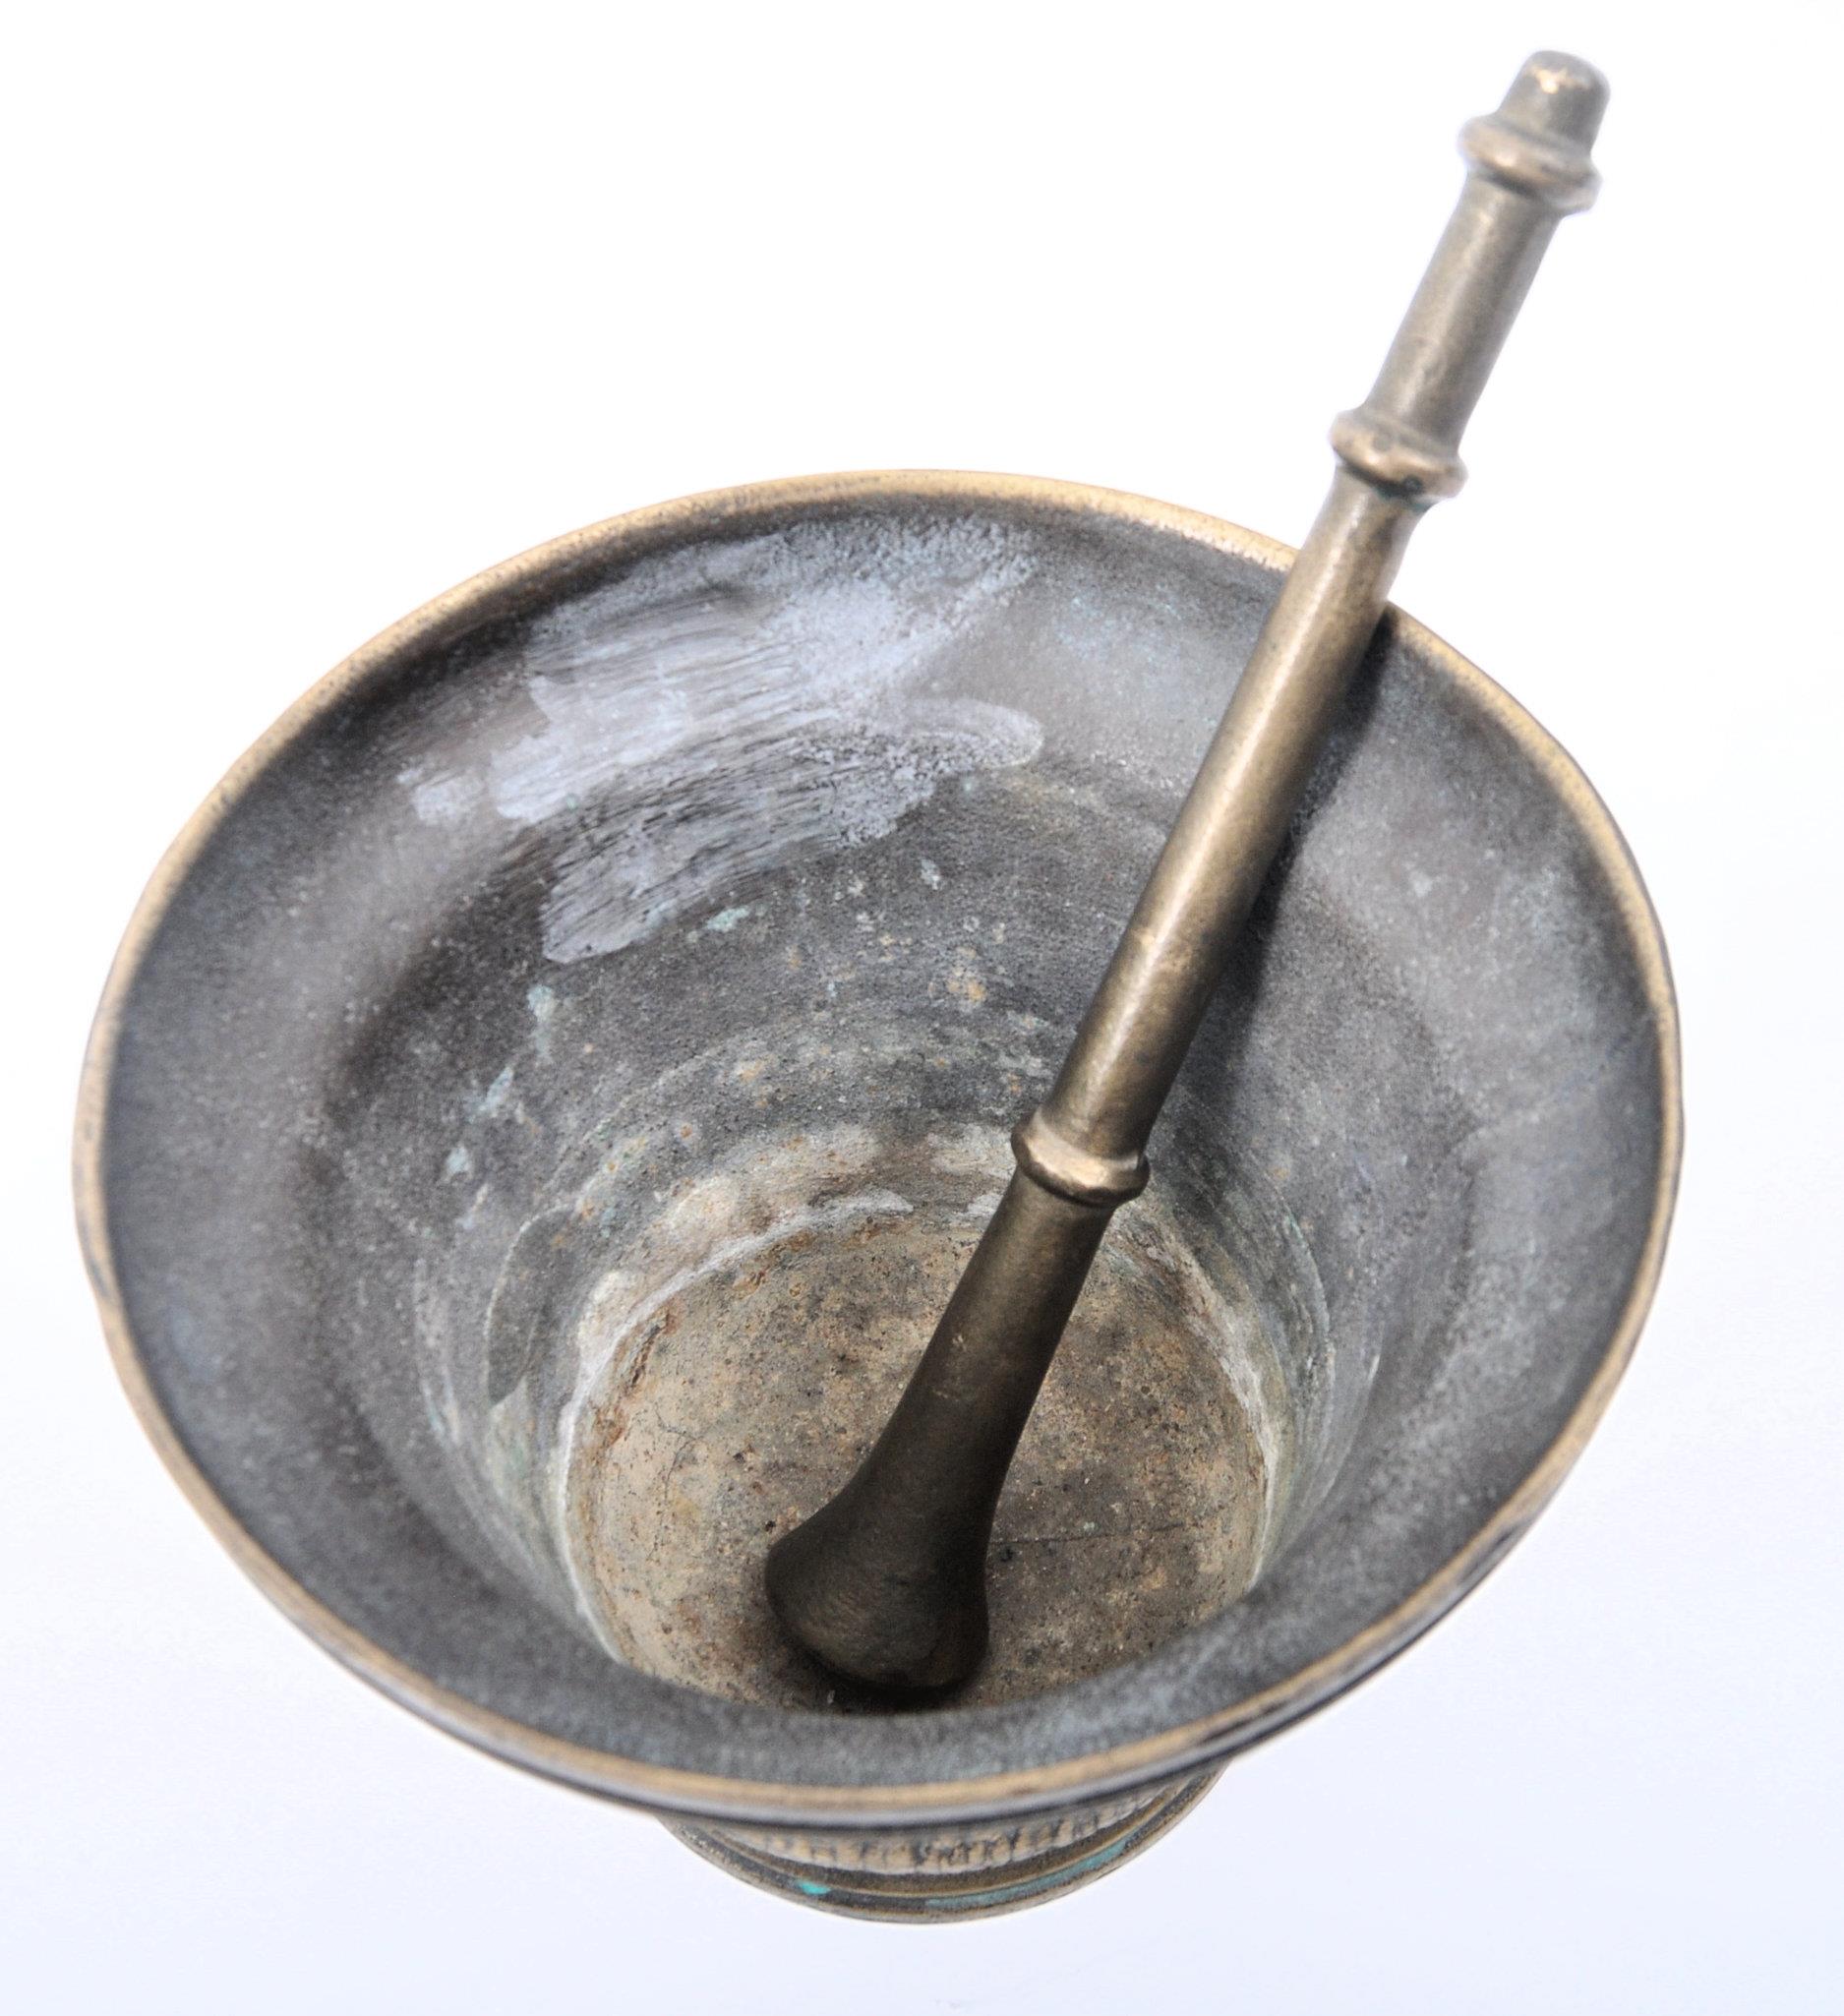 17TH CENTURY LARGE BRONZE PESTLE AND MORTAR - Image 2 of 5